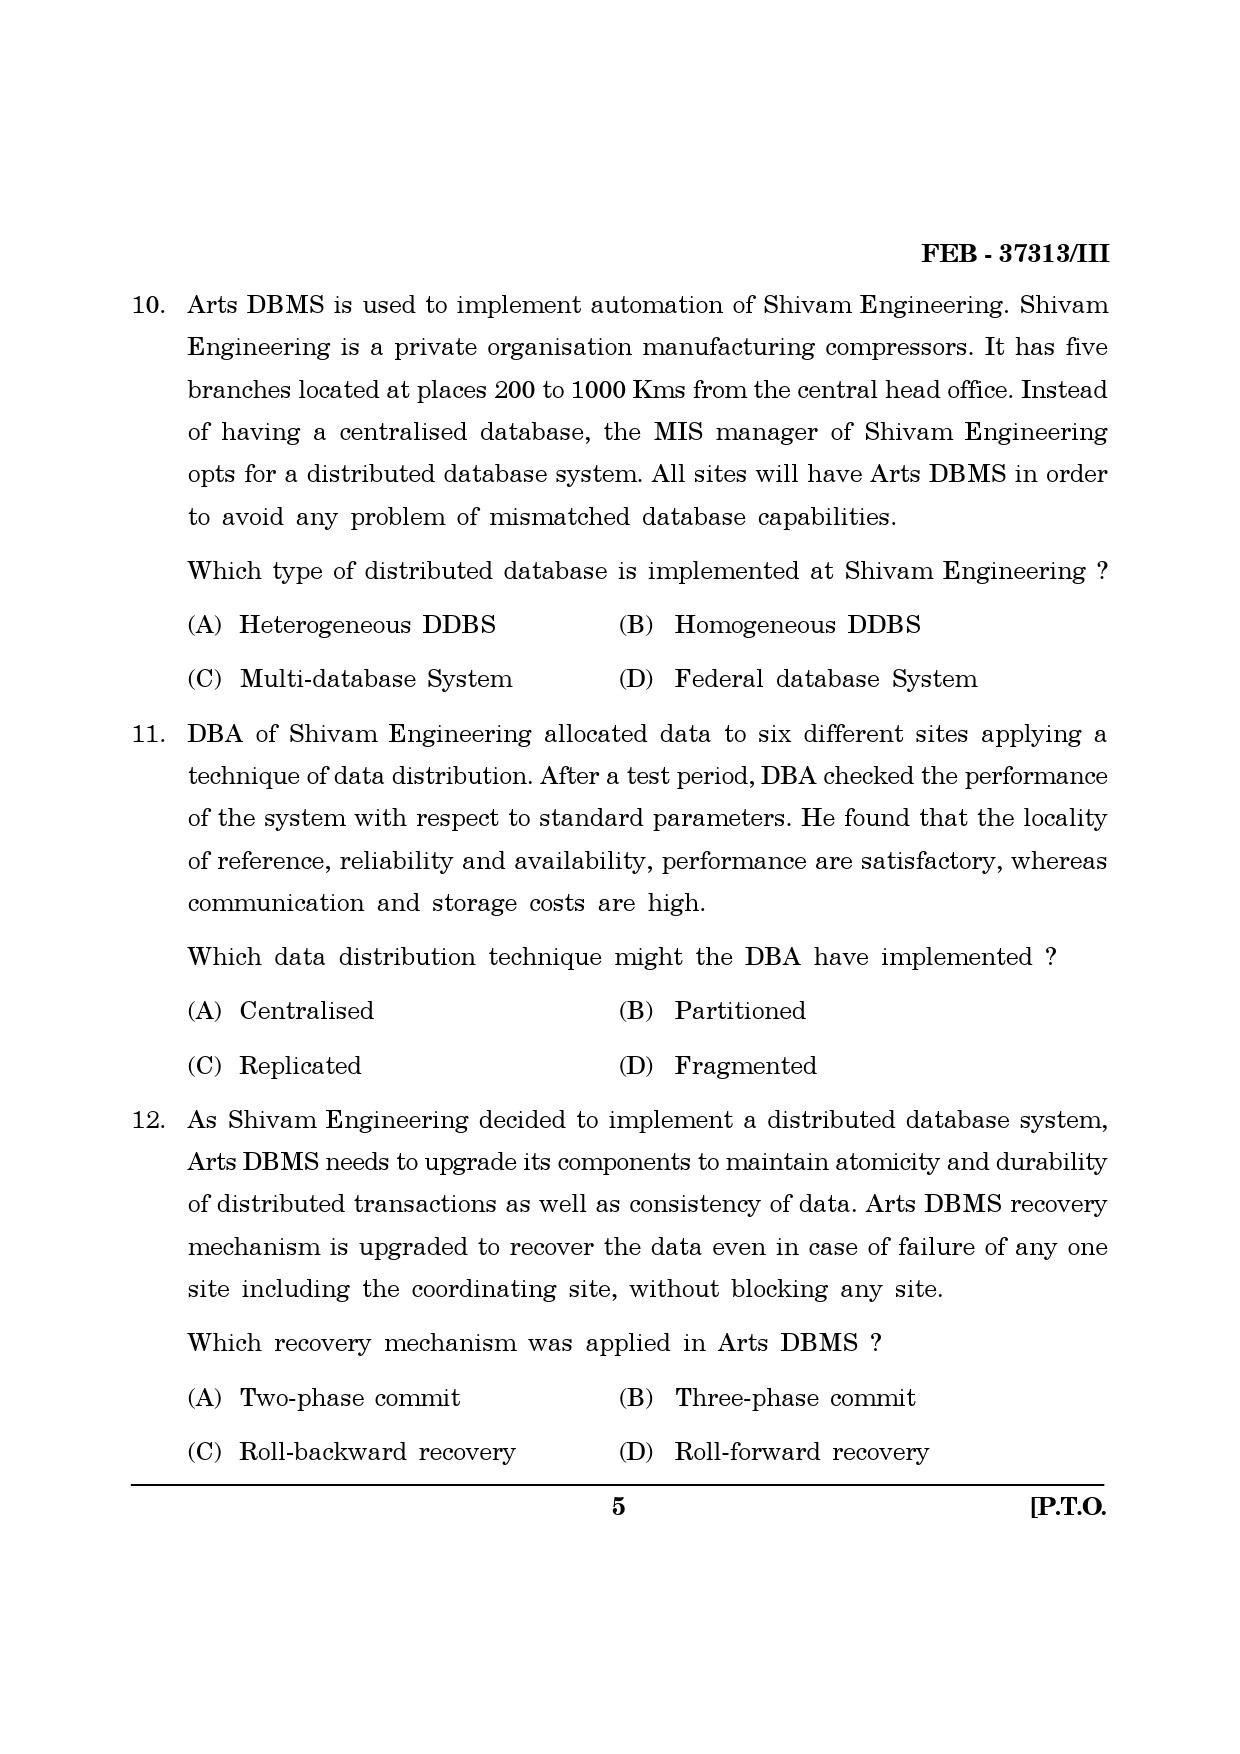 Maharashtra SET Computer Science and Application Question Paper III February 2013 5